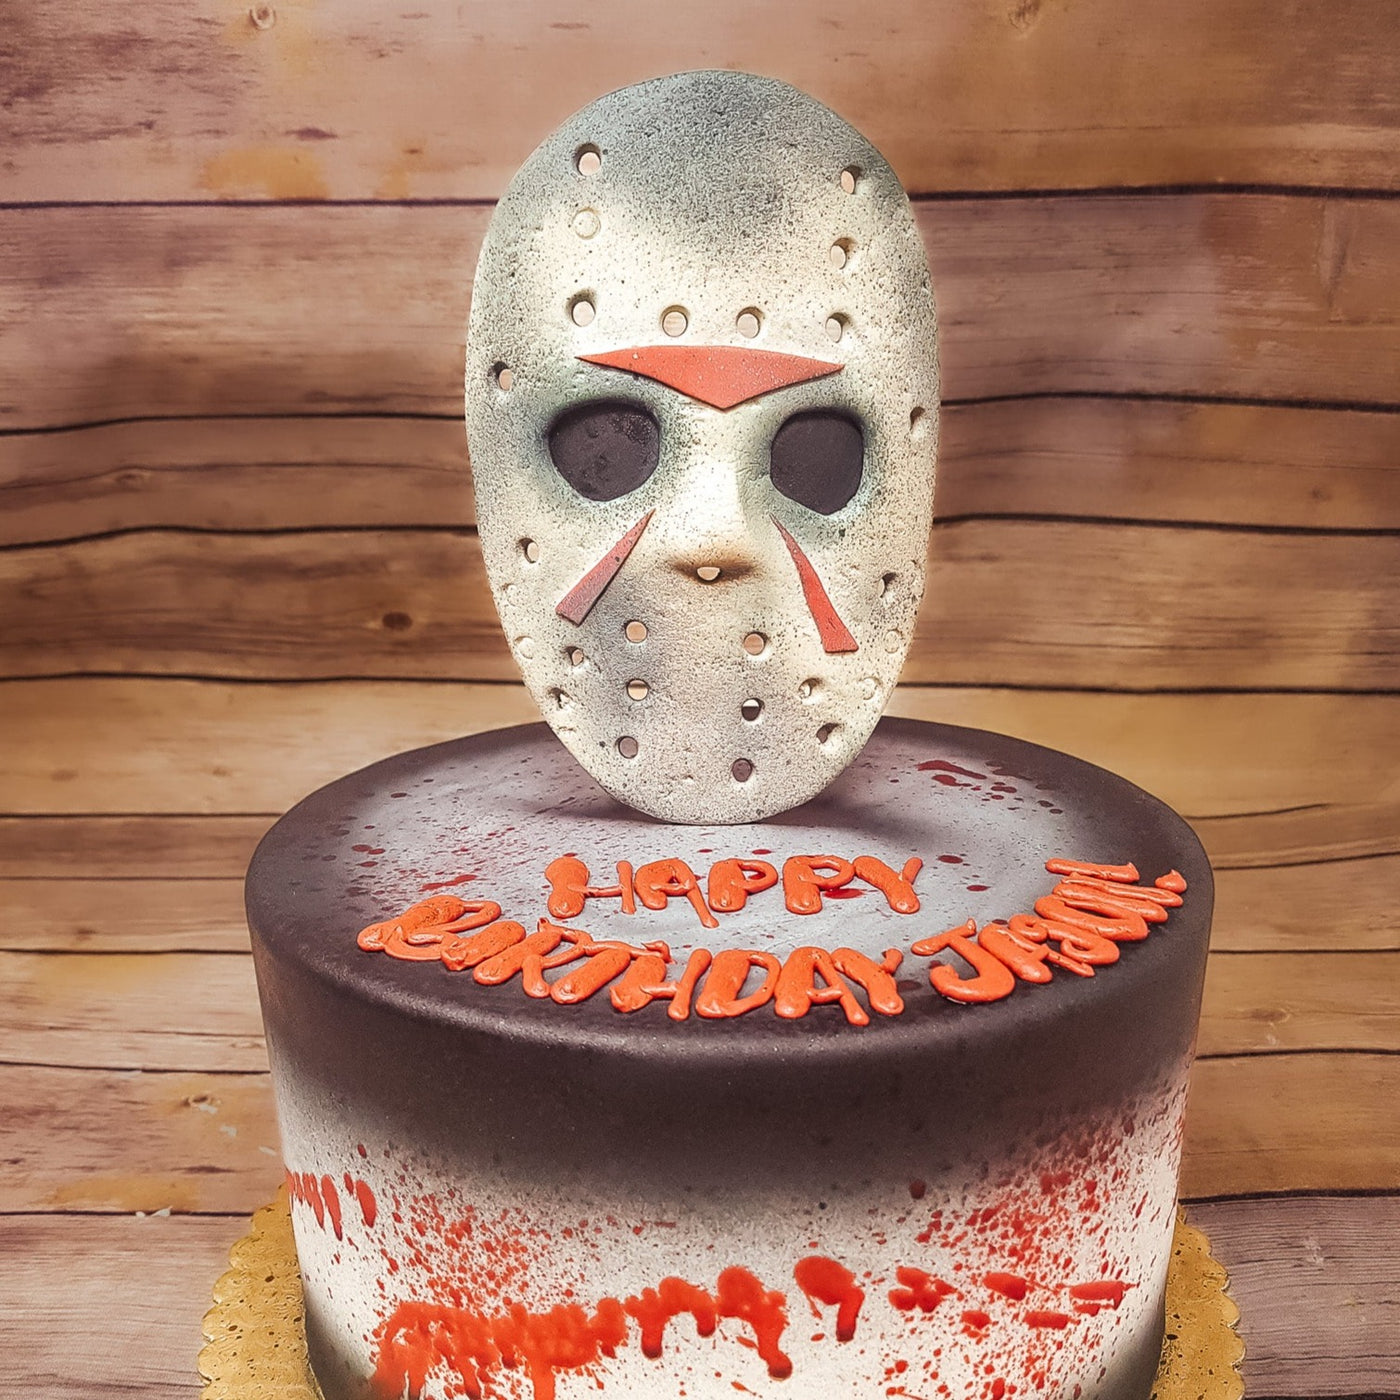 Jason Voorhees, Friday the 13th cake, halloween cake, october birthday, delivery horror cake